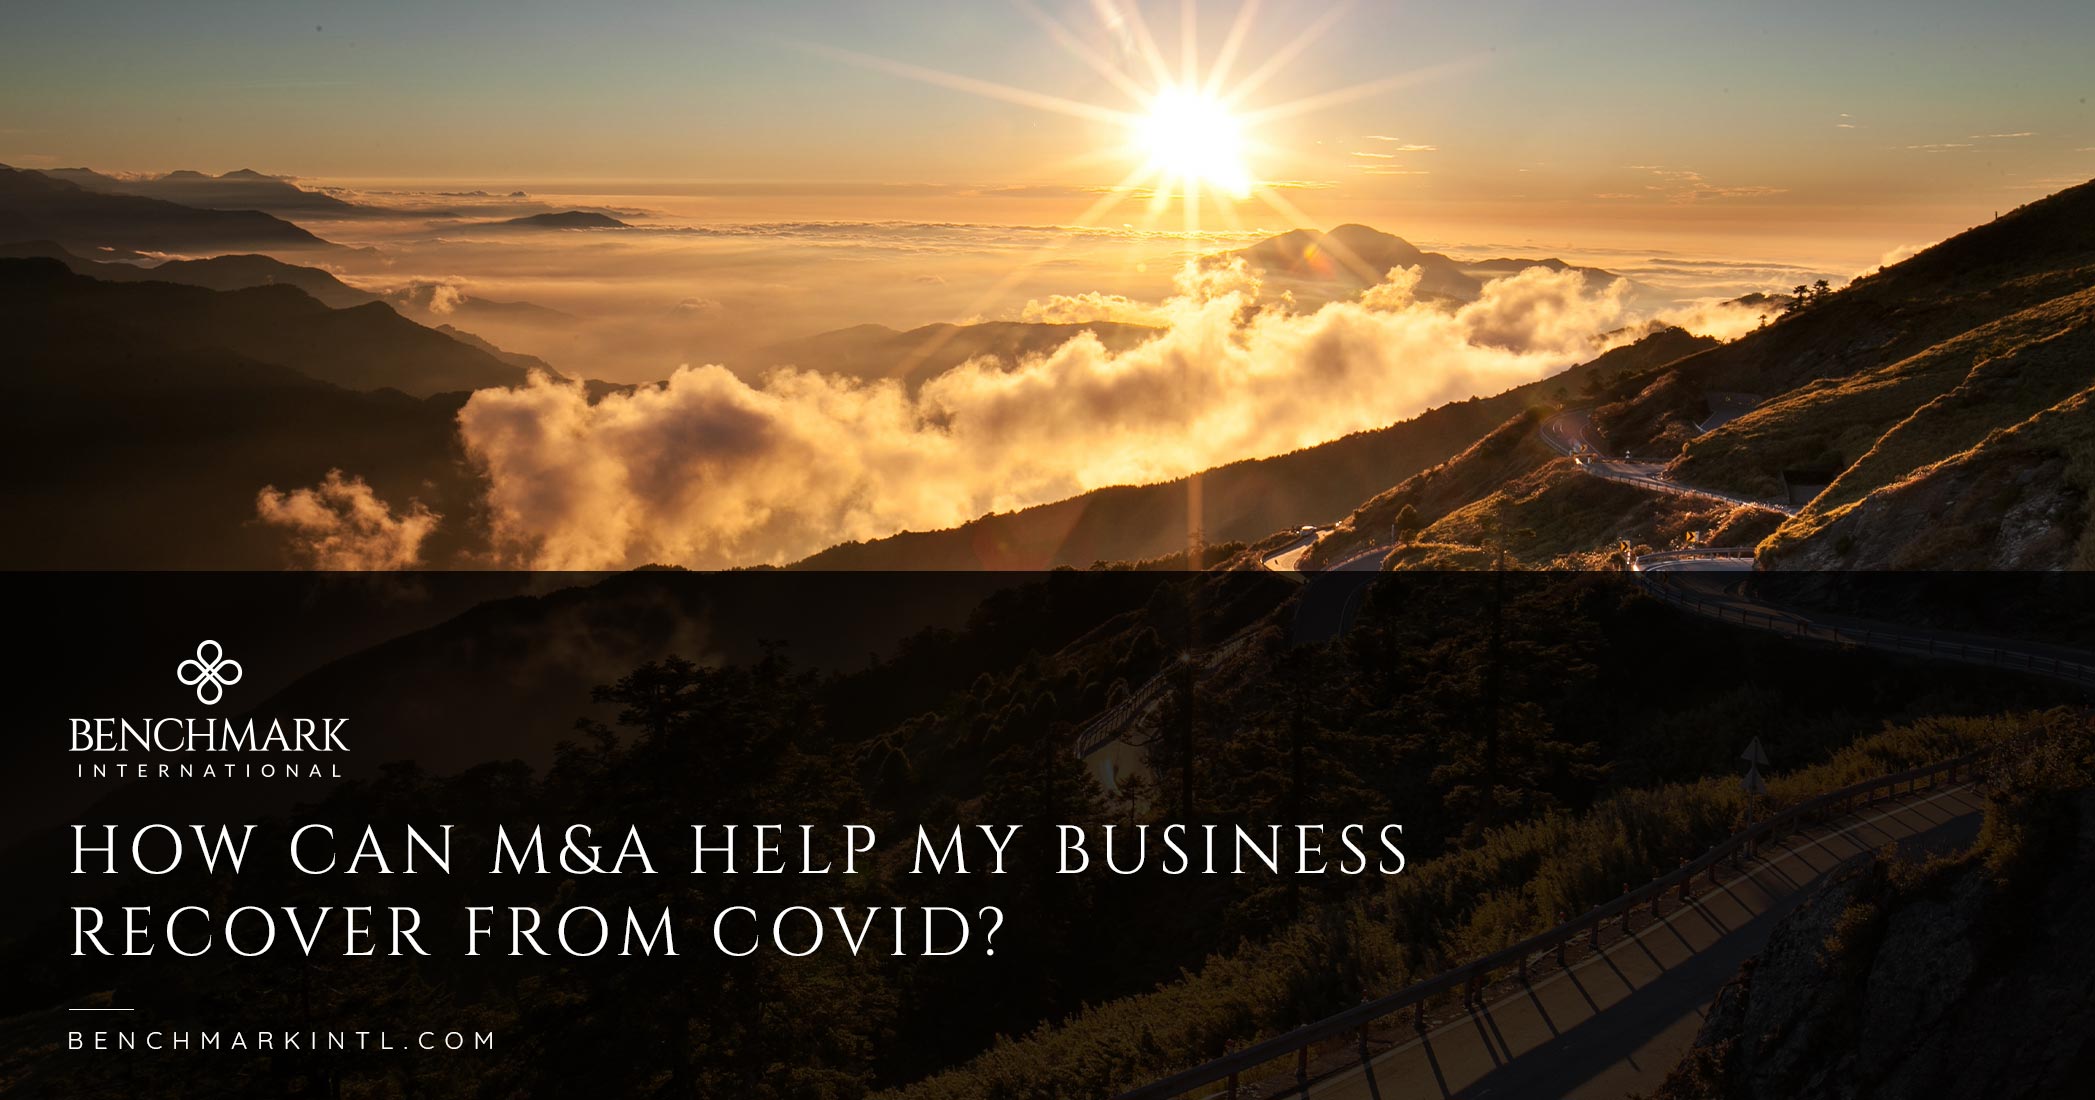 How Can M&A Help My Business Recover From Covid?